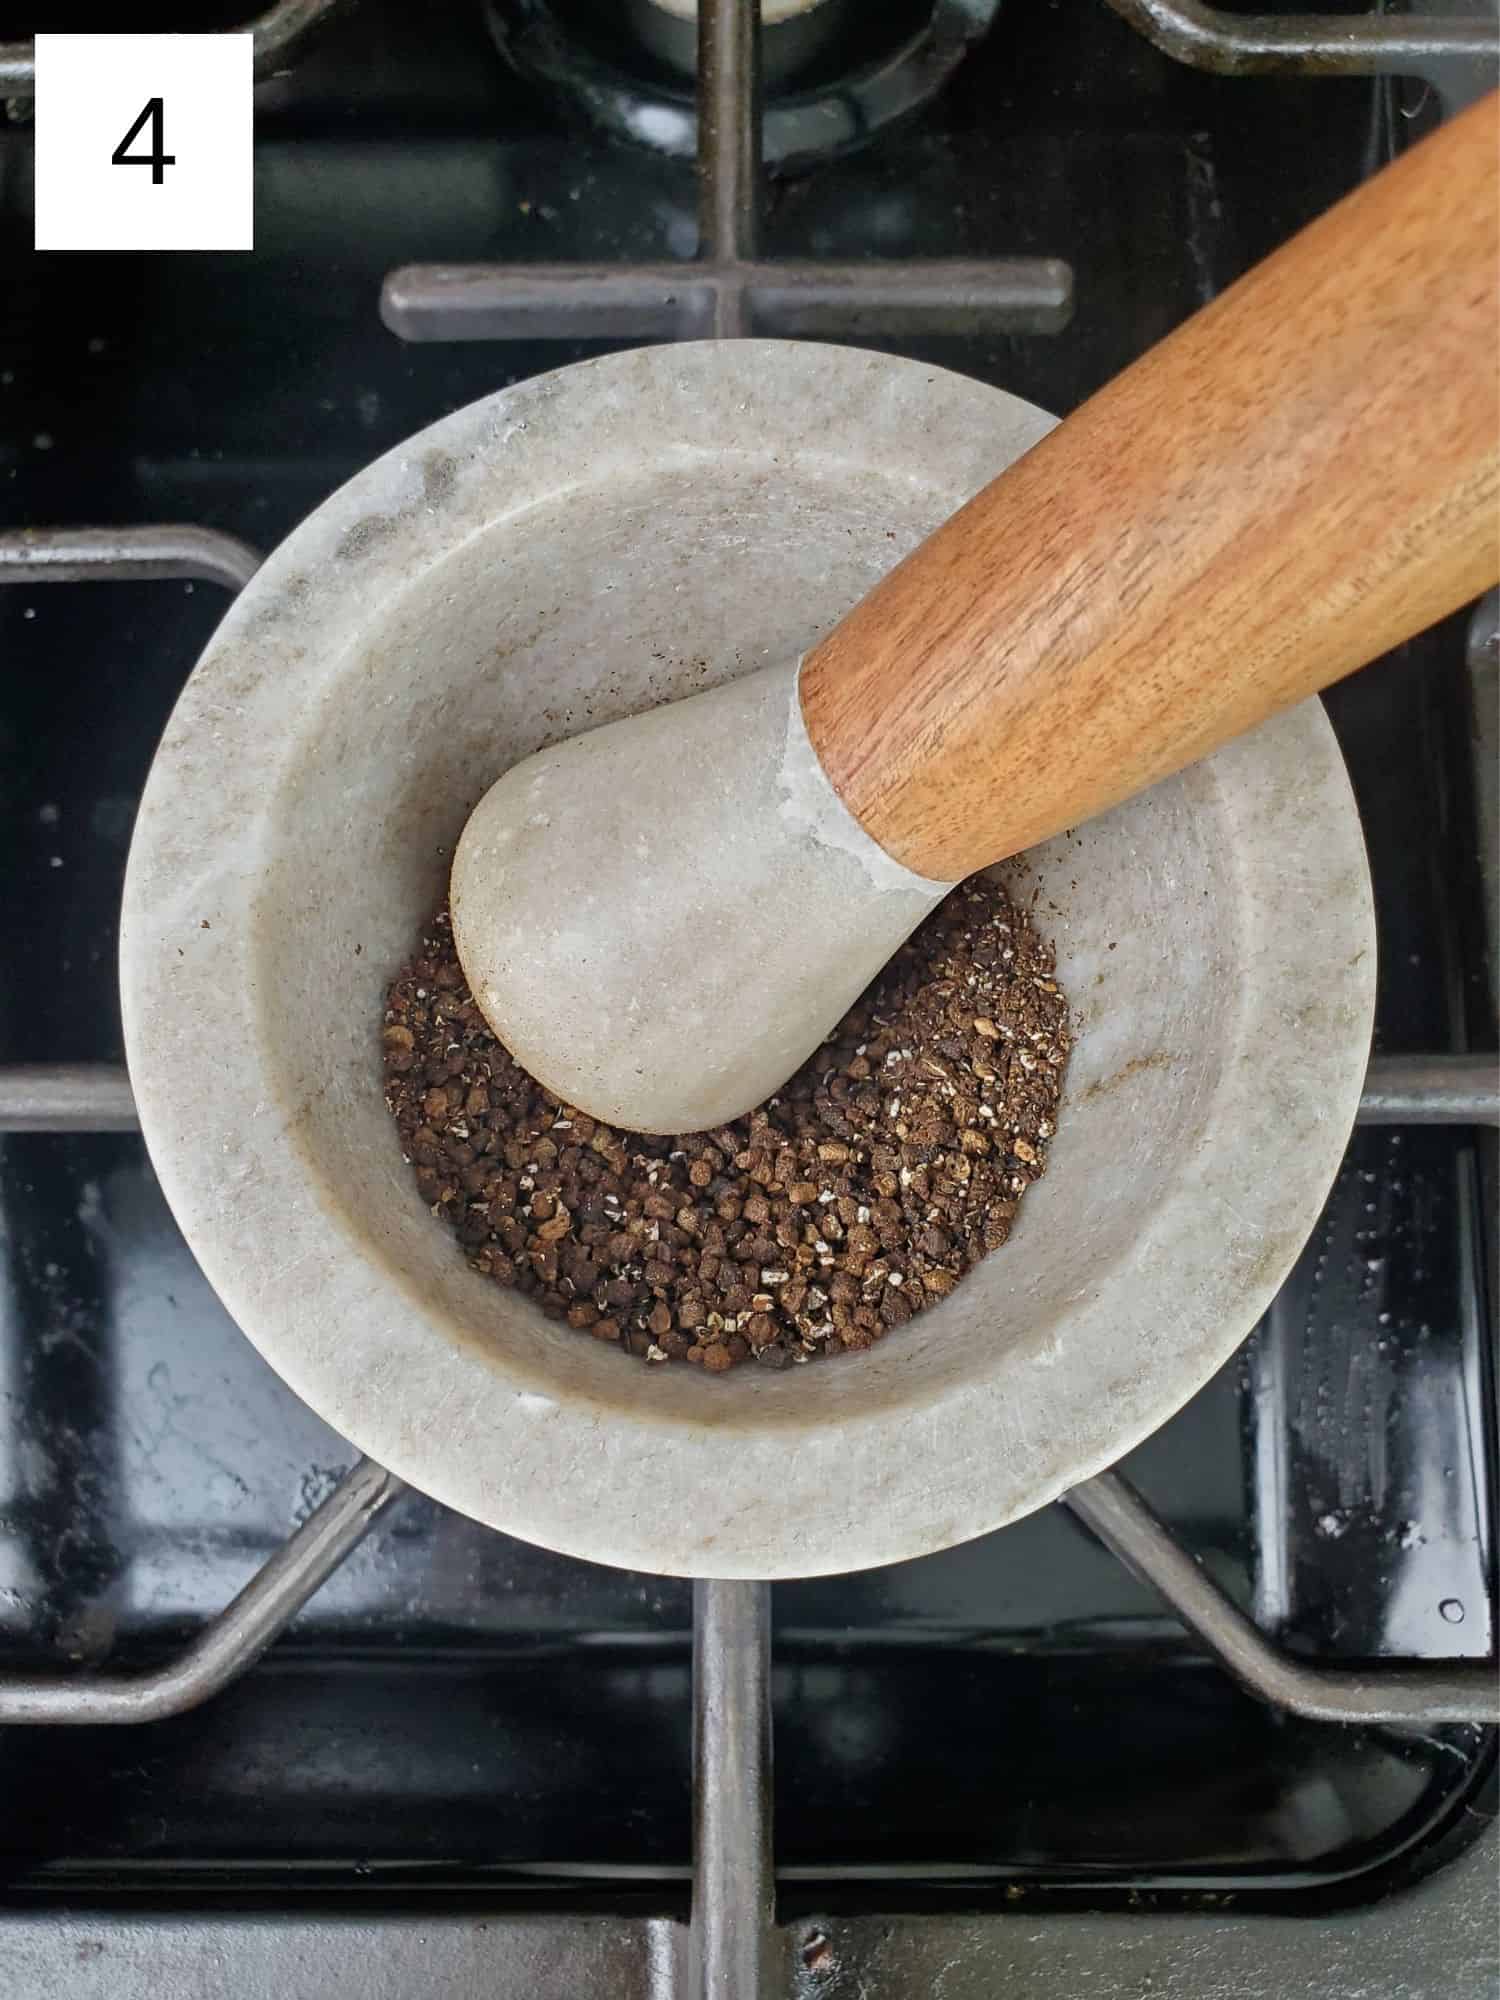 grinding the toasted cardamom seeds using a mortar and pestle.